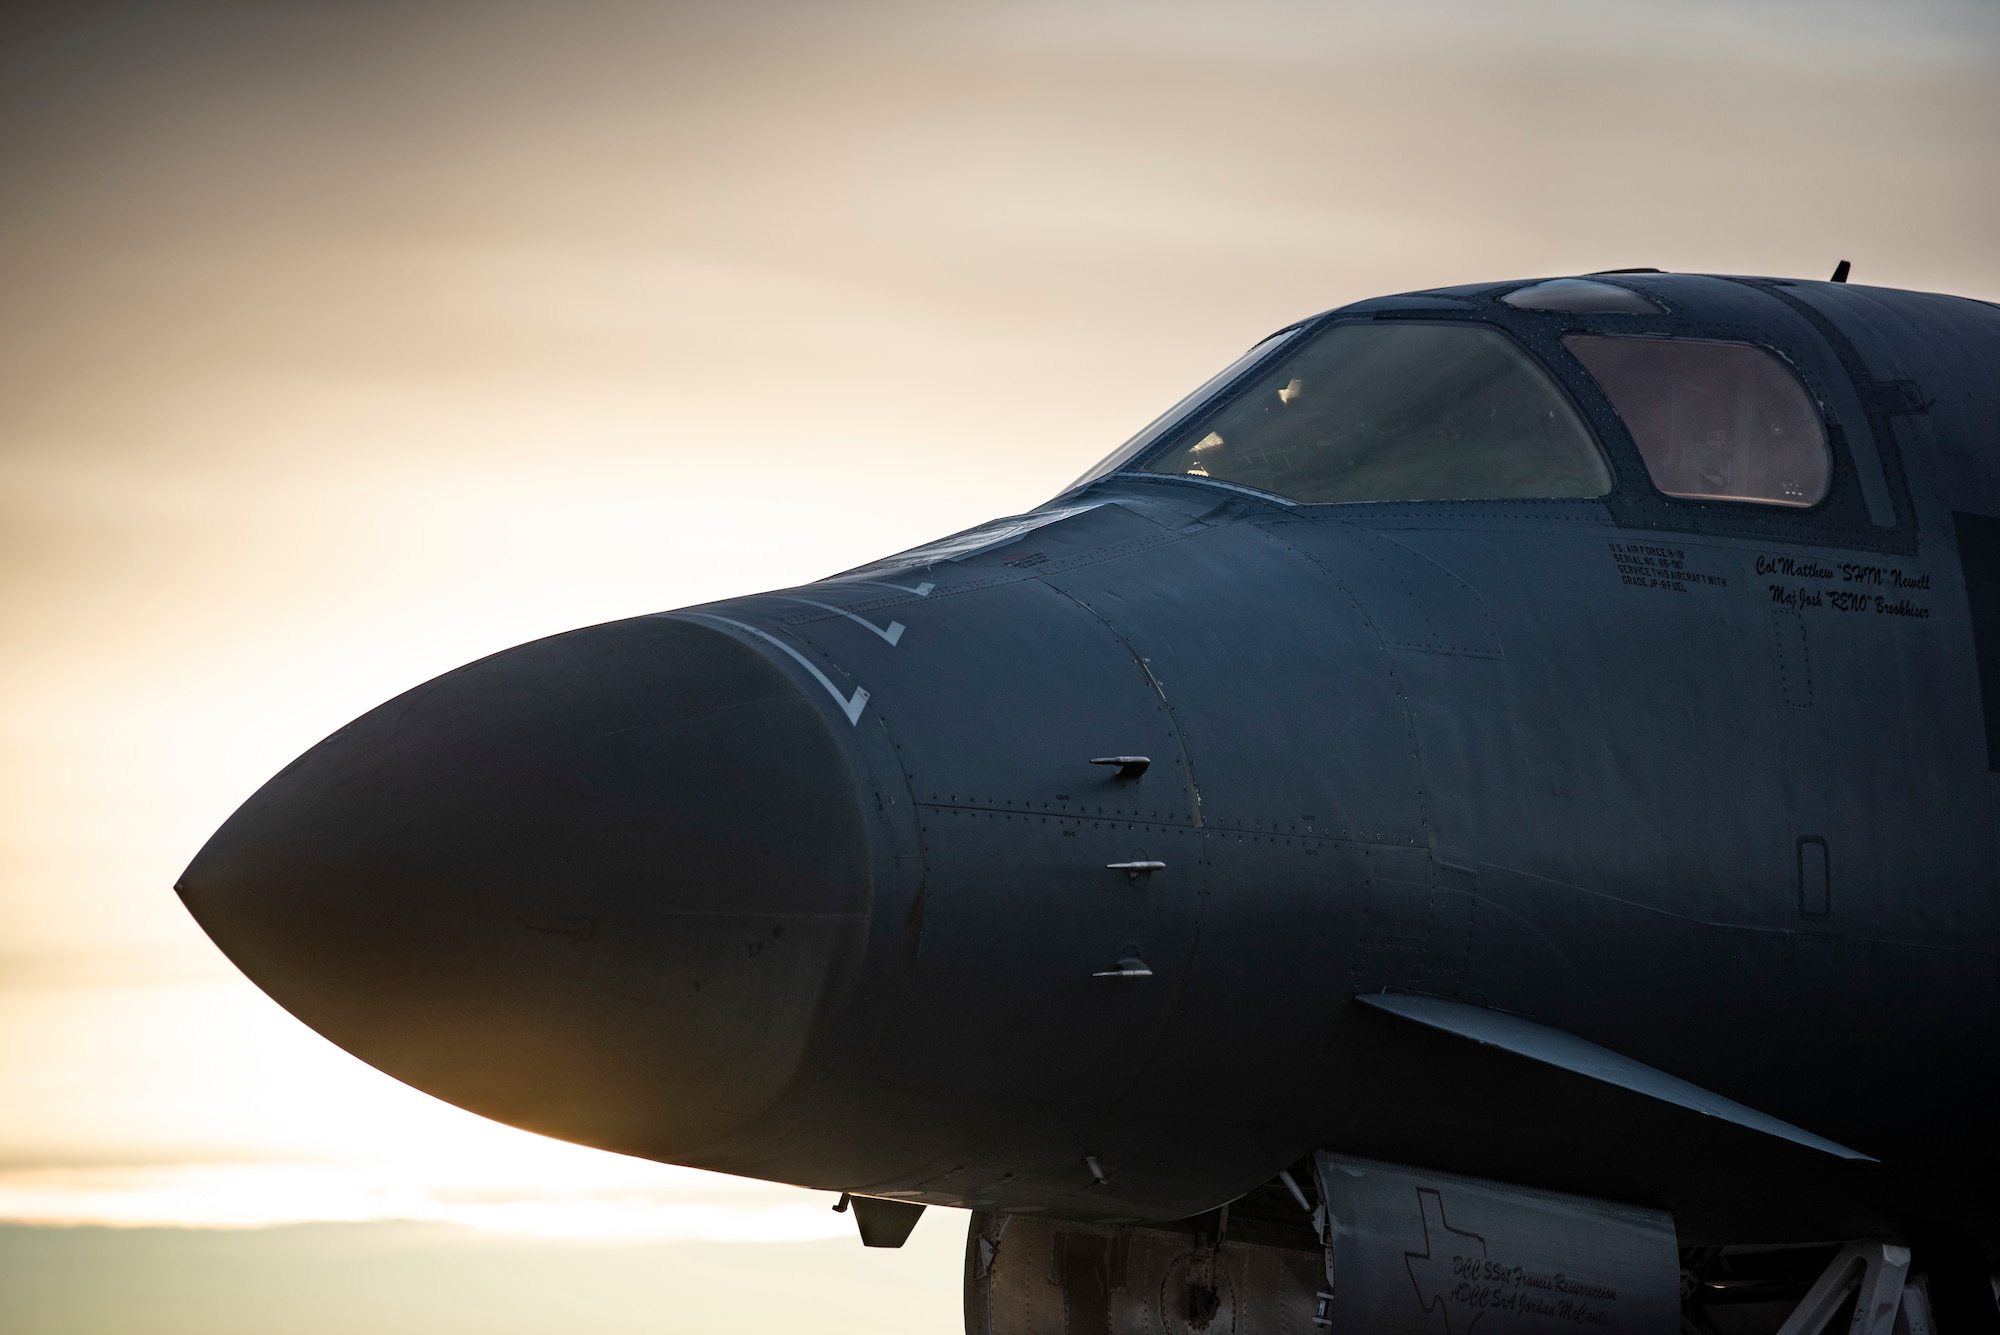 A B-1B Lancer assigned to the 9th Expeditionary Bomb Squadron sits on the flightline at Ørland Air Force Station, Norway, March 14, 2021. The multi-mission B-1B can rapidly deliver massive quantities of precision and non-precision munitions against any adversary, anywhere in the world at any time. (U.S. Air Force photo by Airman 1st Class Colin Hollowell)